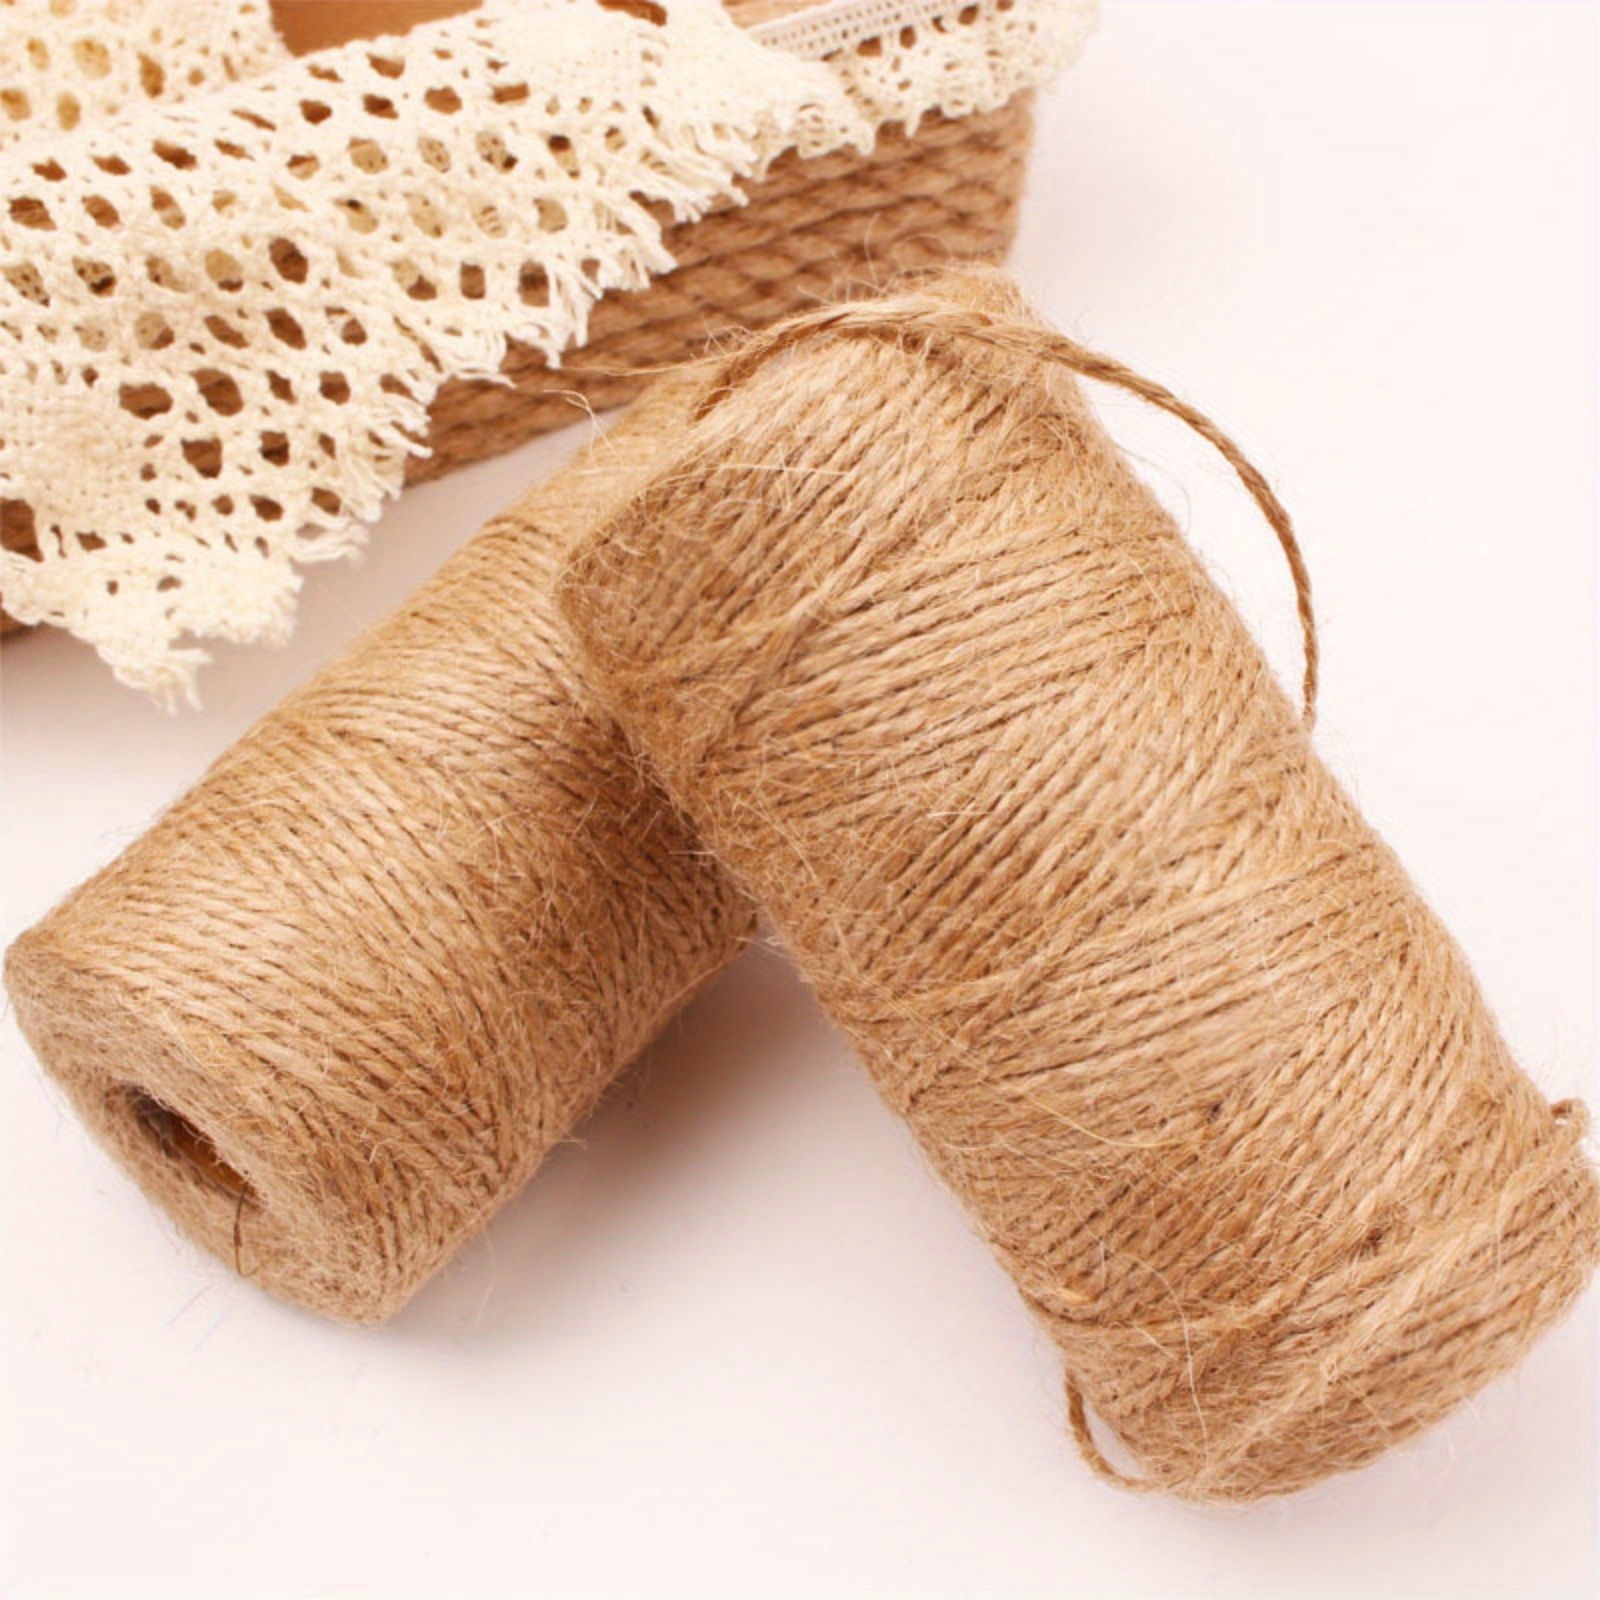 328Ft Natural Jute Twine 2MM String For Crafts Gardening Plant